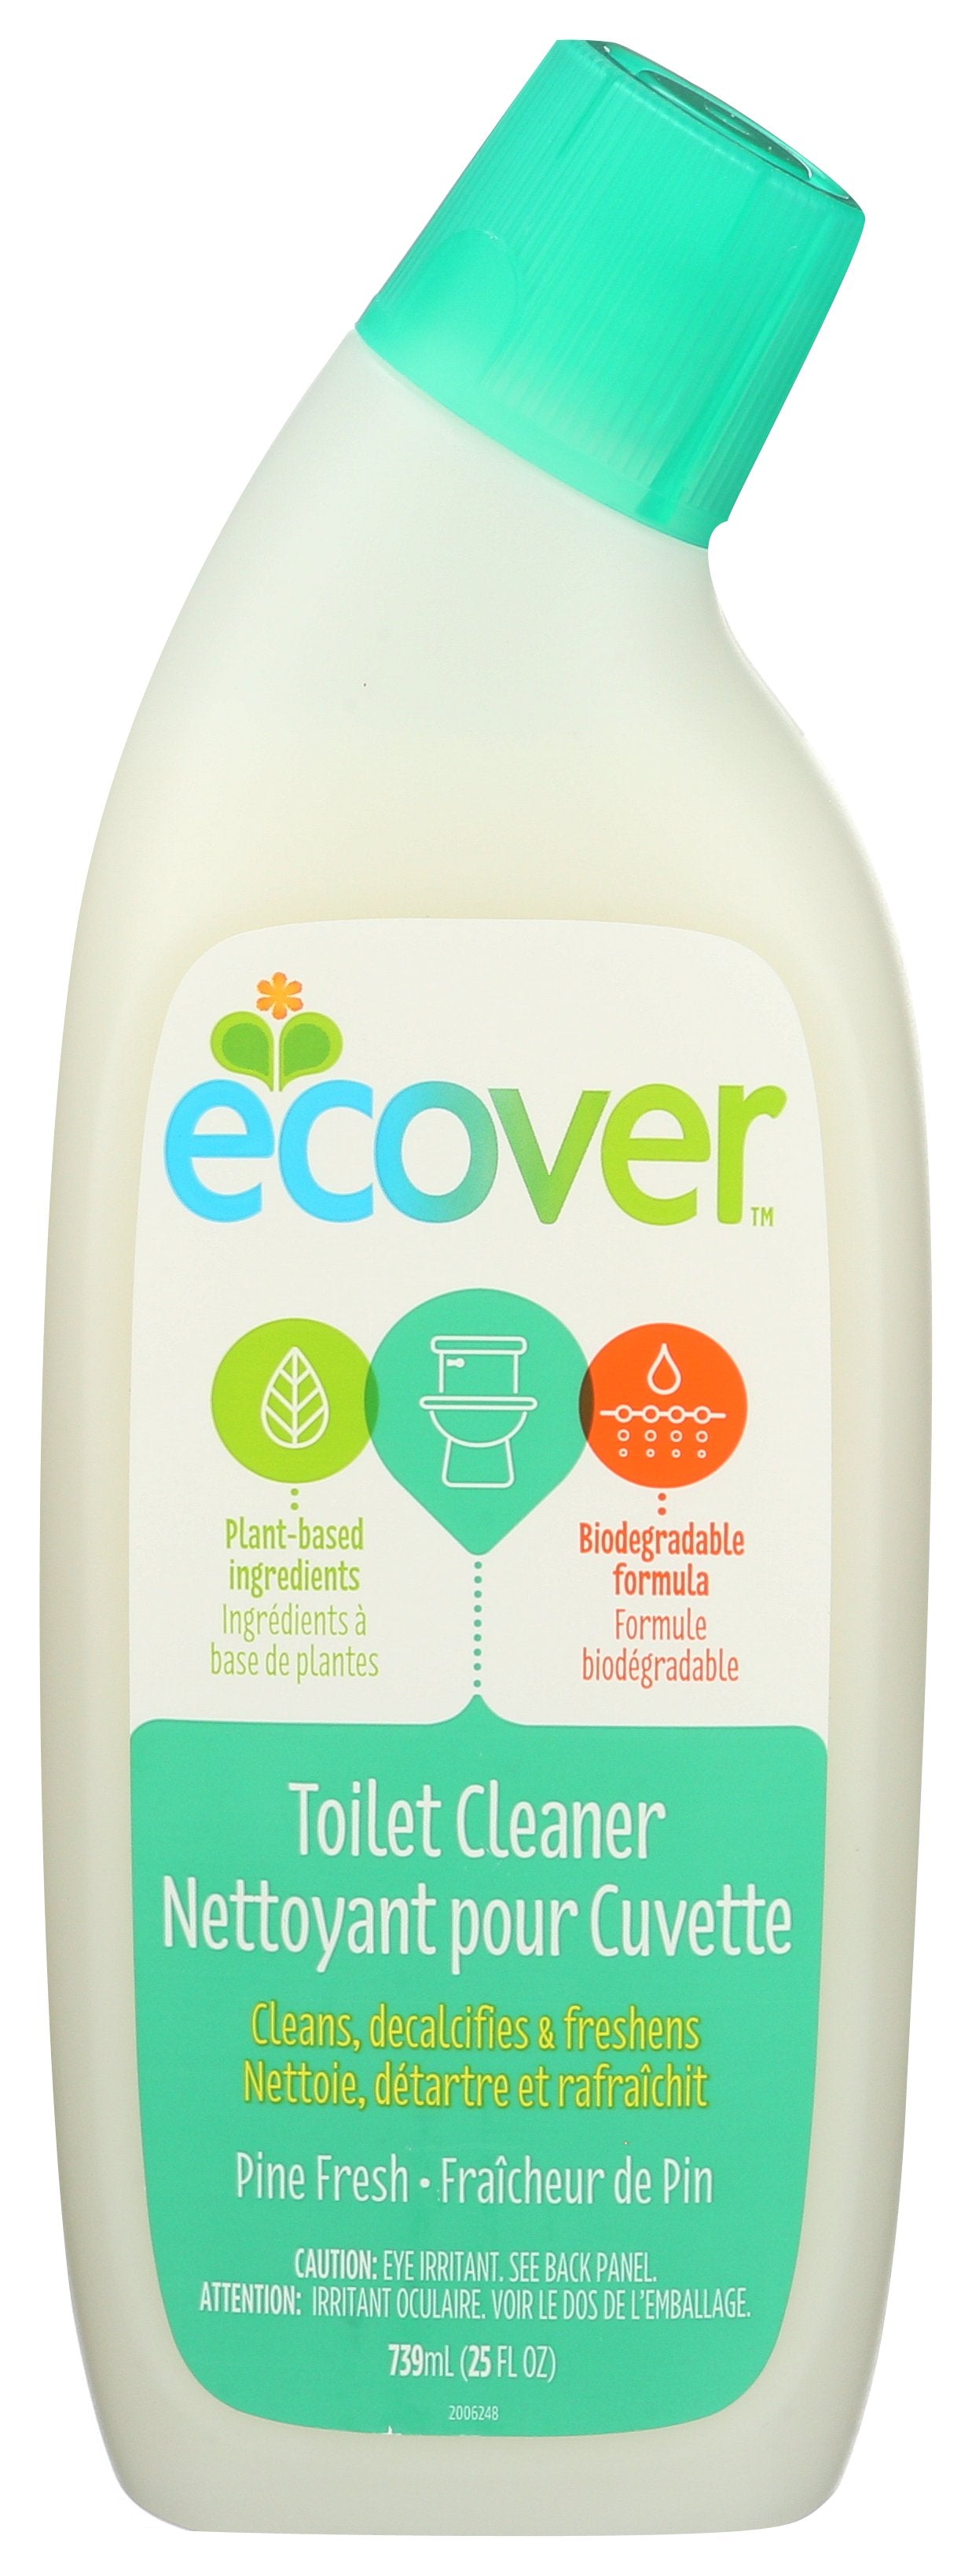 ECOVER CLEANER TOILET